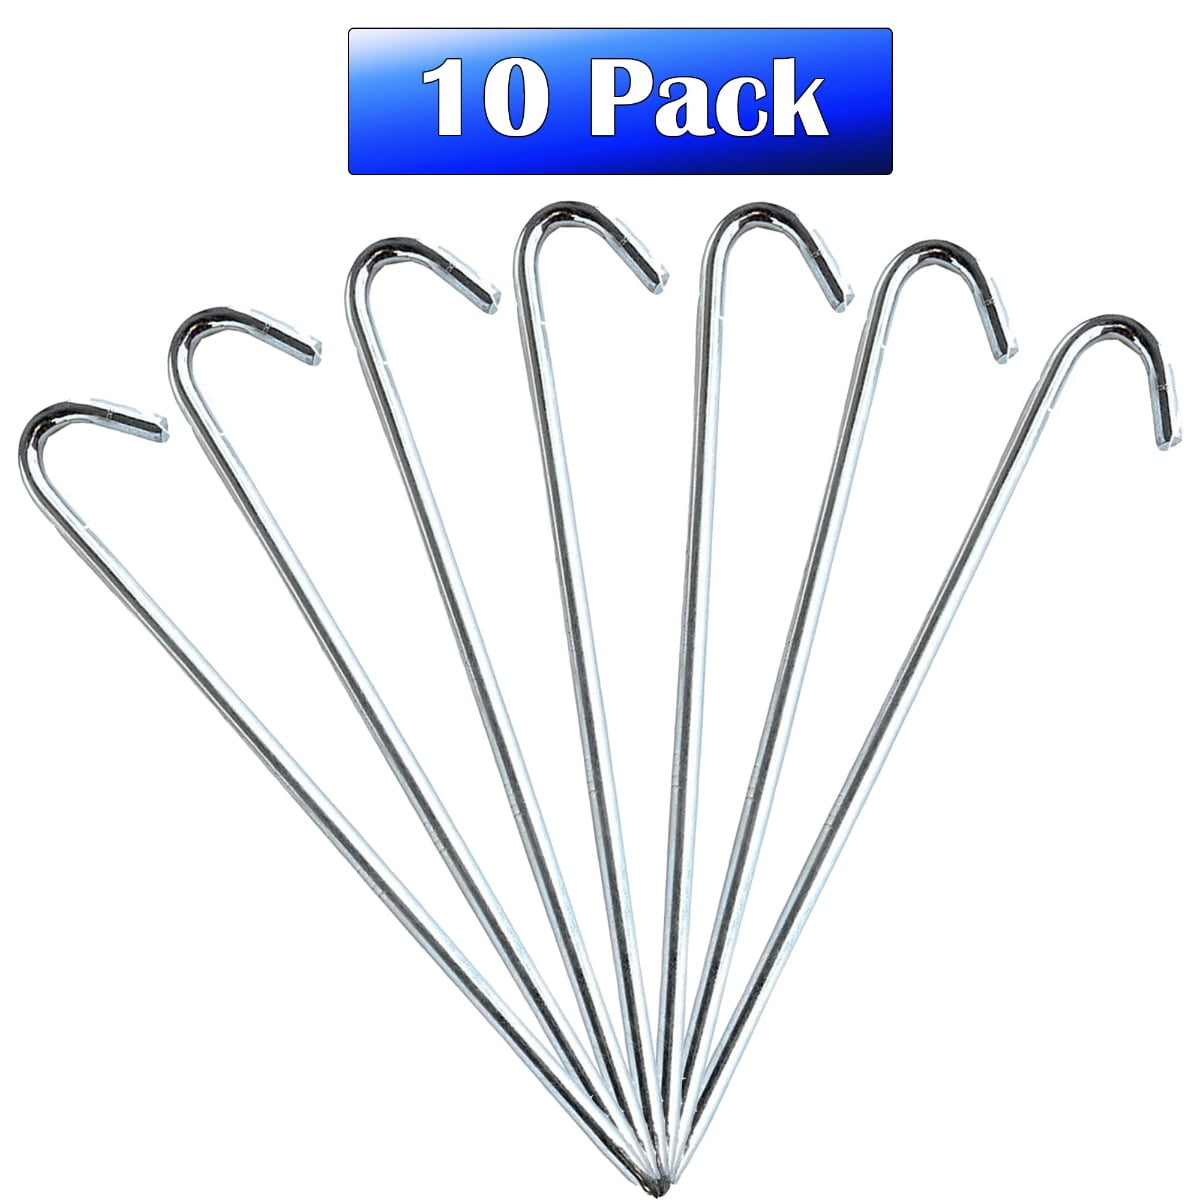 LOT OF 5x STEEL STAKES SPIKES NAILS ANCHOR TIE DOWNS HEAVY DUTY 10" x 3/8" 